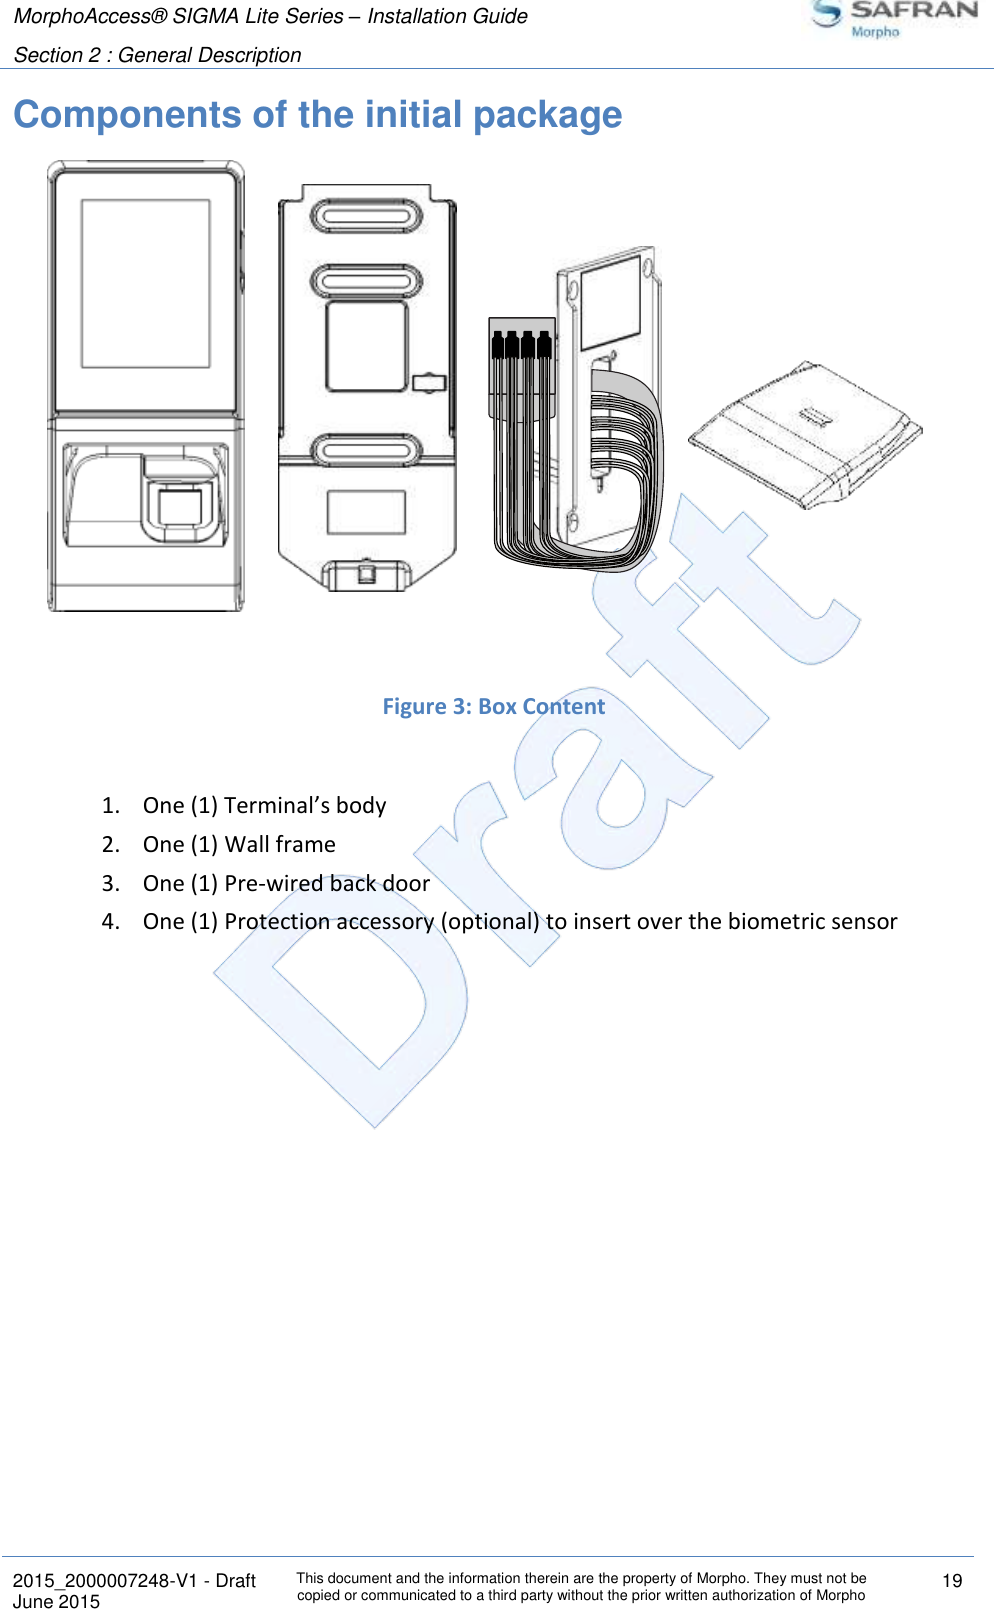 MorphoAccess® SIGMA Lite Series – Installation Guide  Section 2 : General Description   2015_2000007248-V1 - Draft This document and the information therein are the property of Morpho. They must not be copied or communicated to a third party without the prior written authorization of Morpho 19 June 2015   Components of the initial package              Figure 3: Box Content  1. One (1) Terminal’s body 2. One (1) Wall frame 3. One (1) Pre-wired back door 4. One (1) Protection accessory (optional) to insert over the biometric sensor   